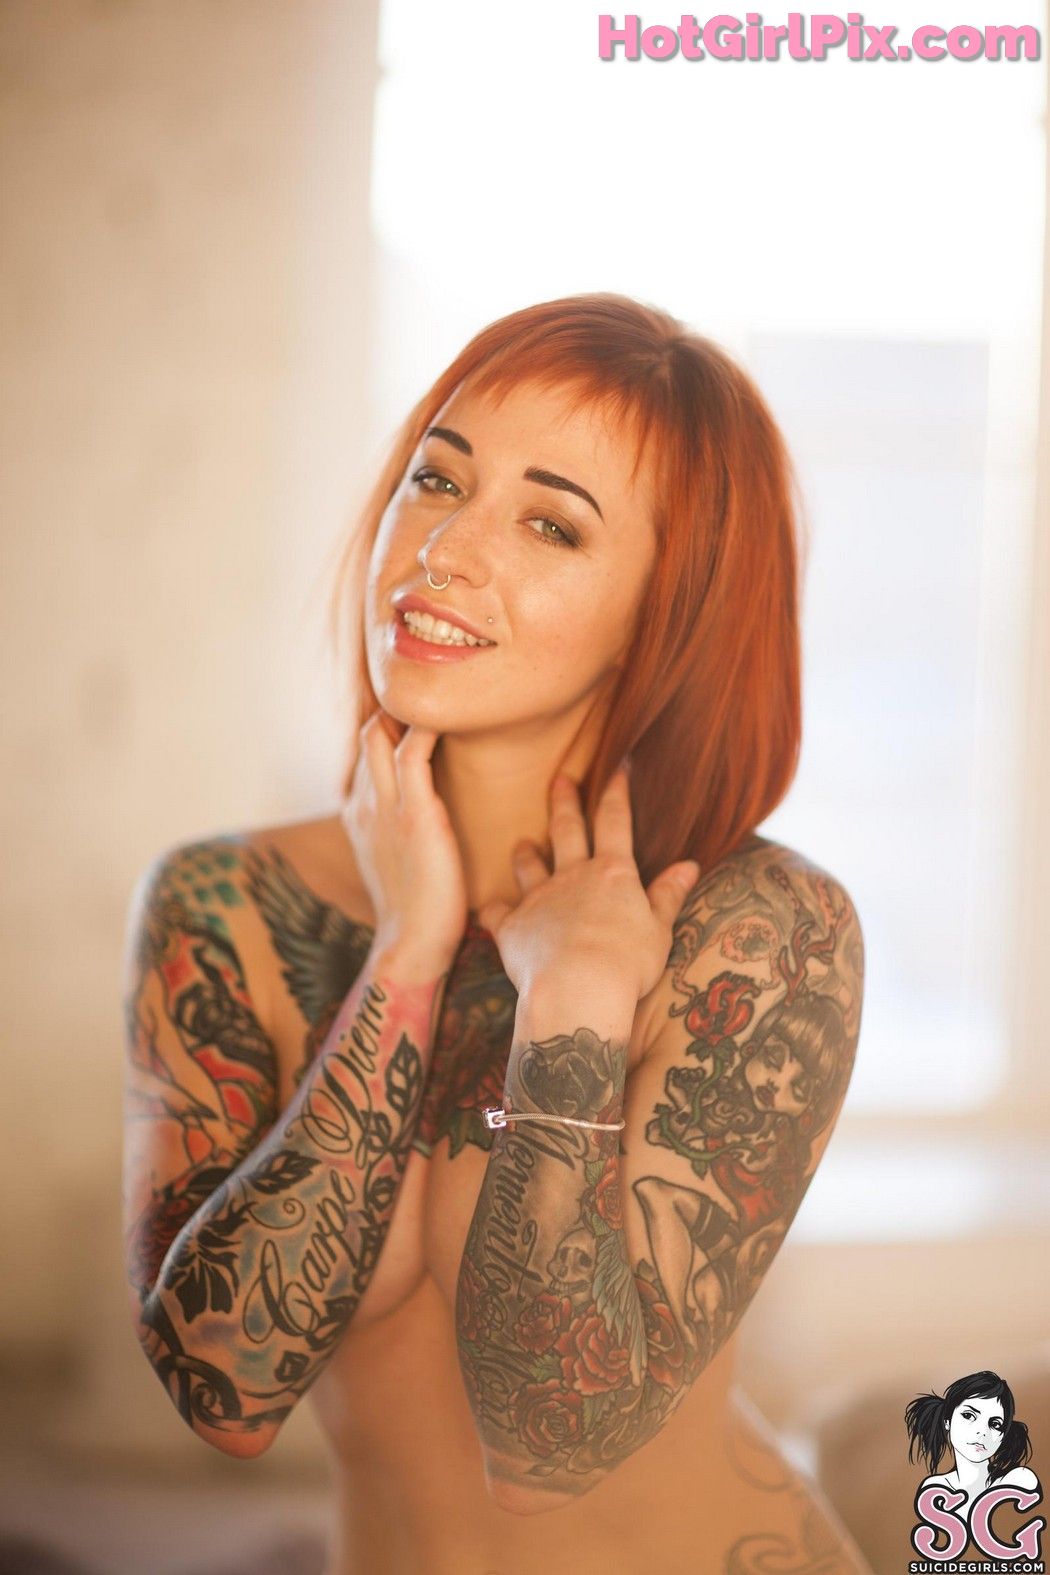 [Suicide Girls] Janesinner - Young and Beautiful